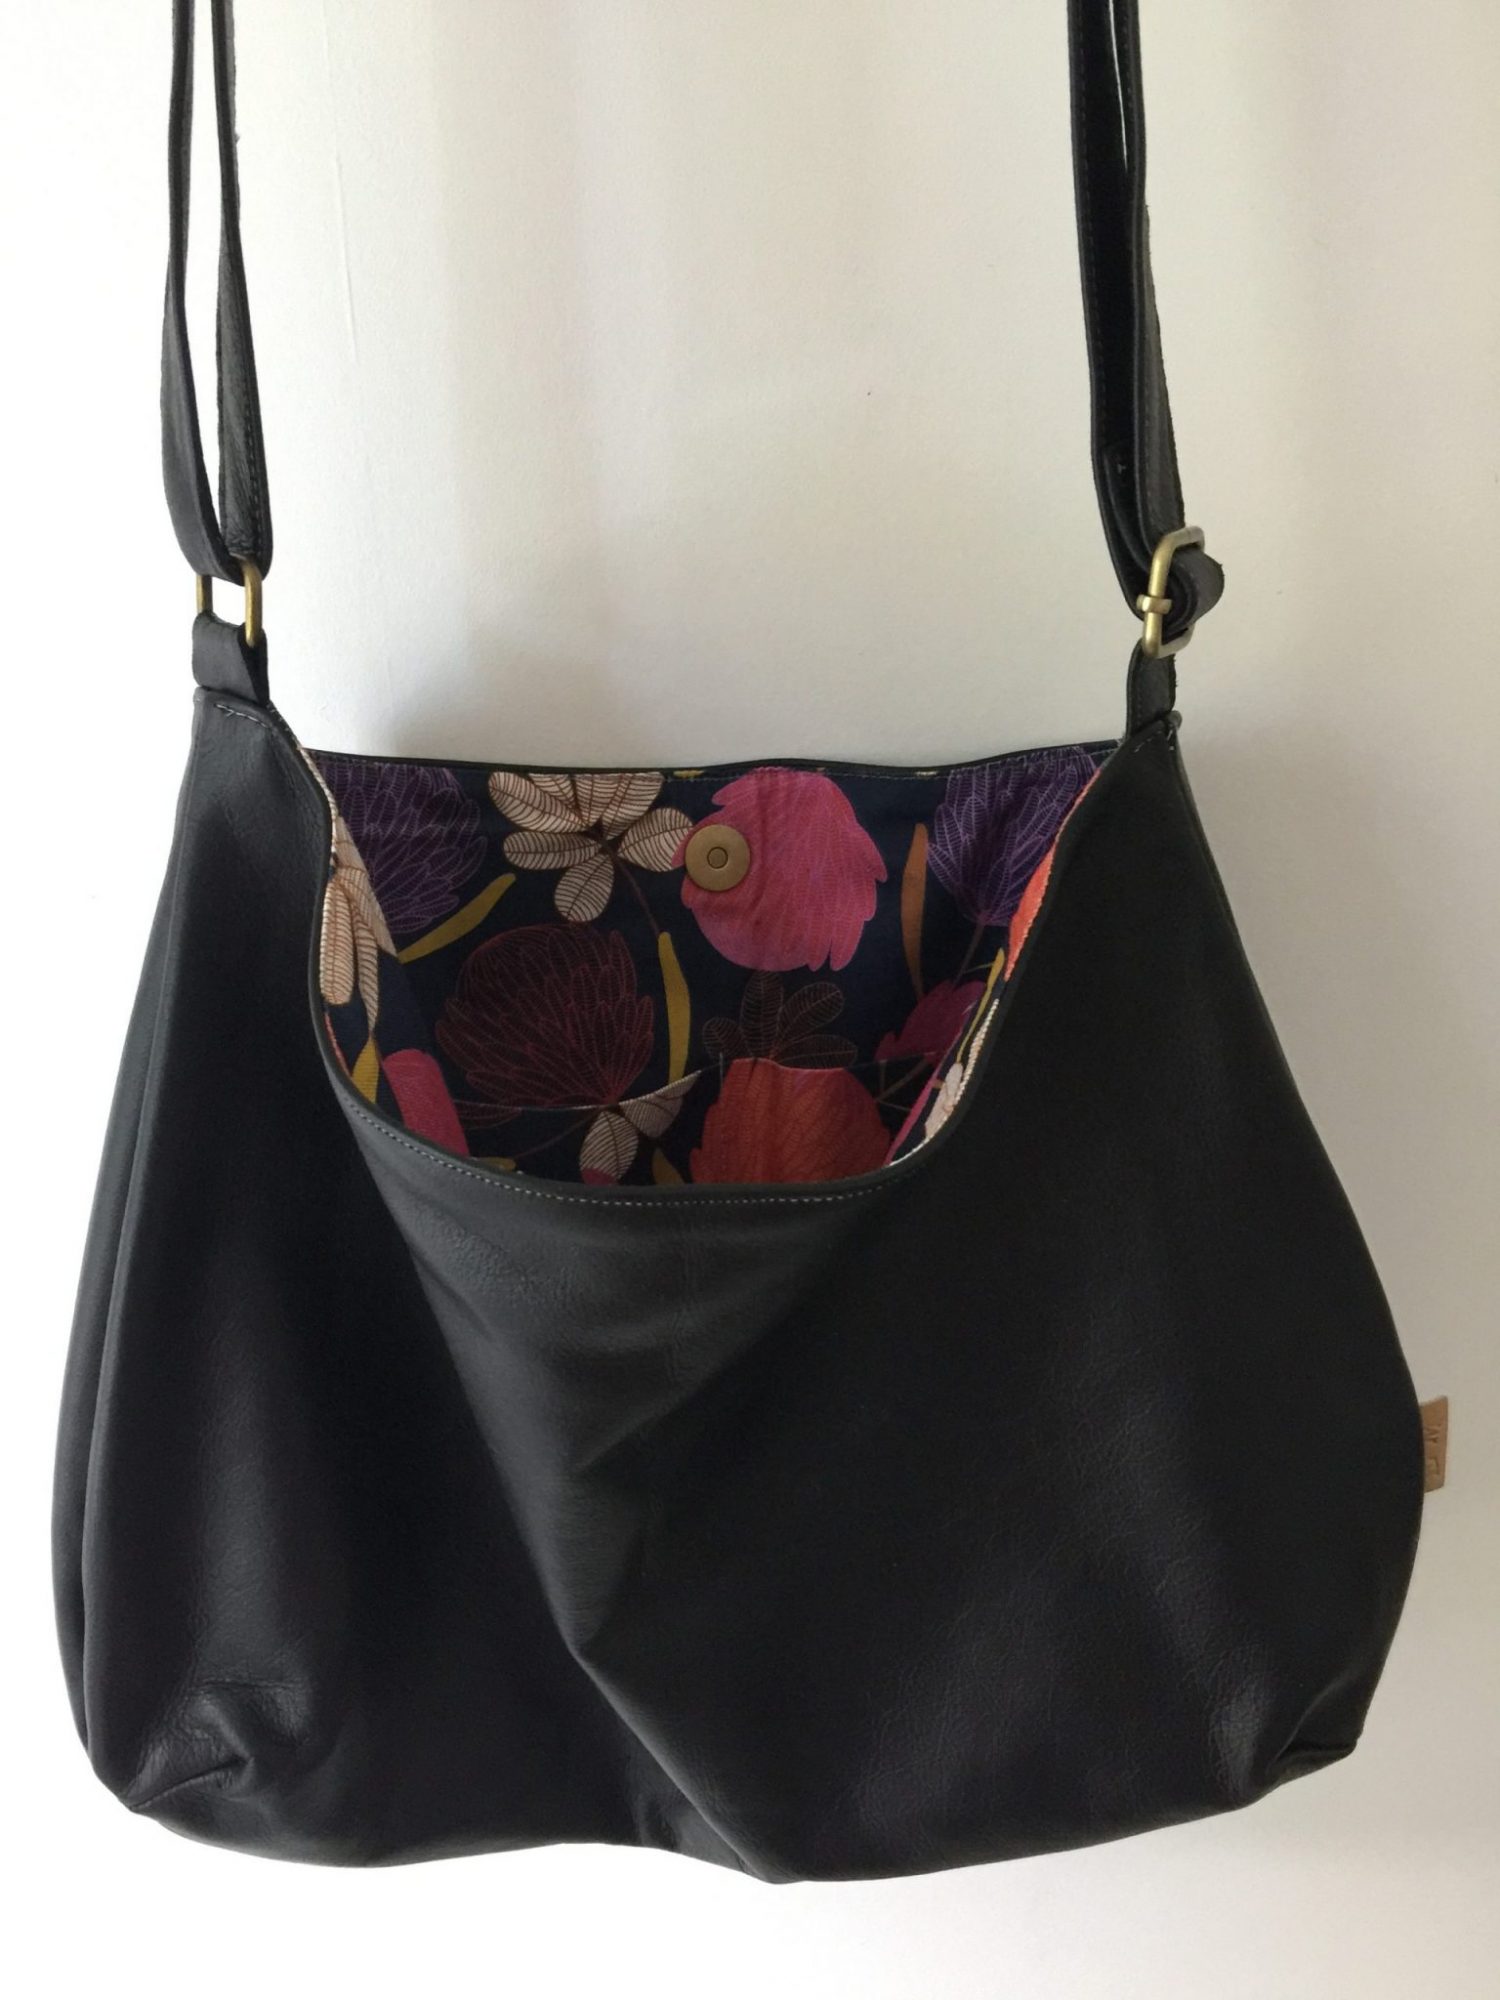 Eeny Meeny Miny Mo, Leather Slouch Bag, CHARCOAL - Marigold and Amber